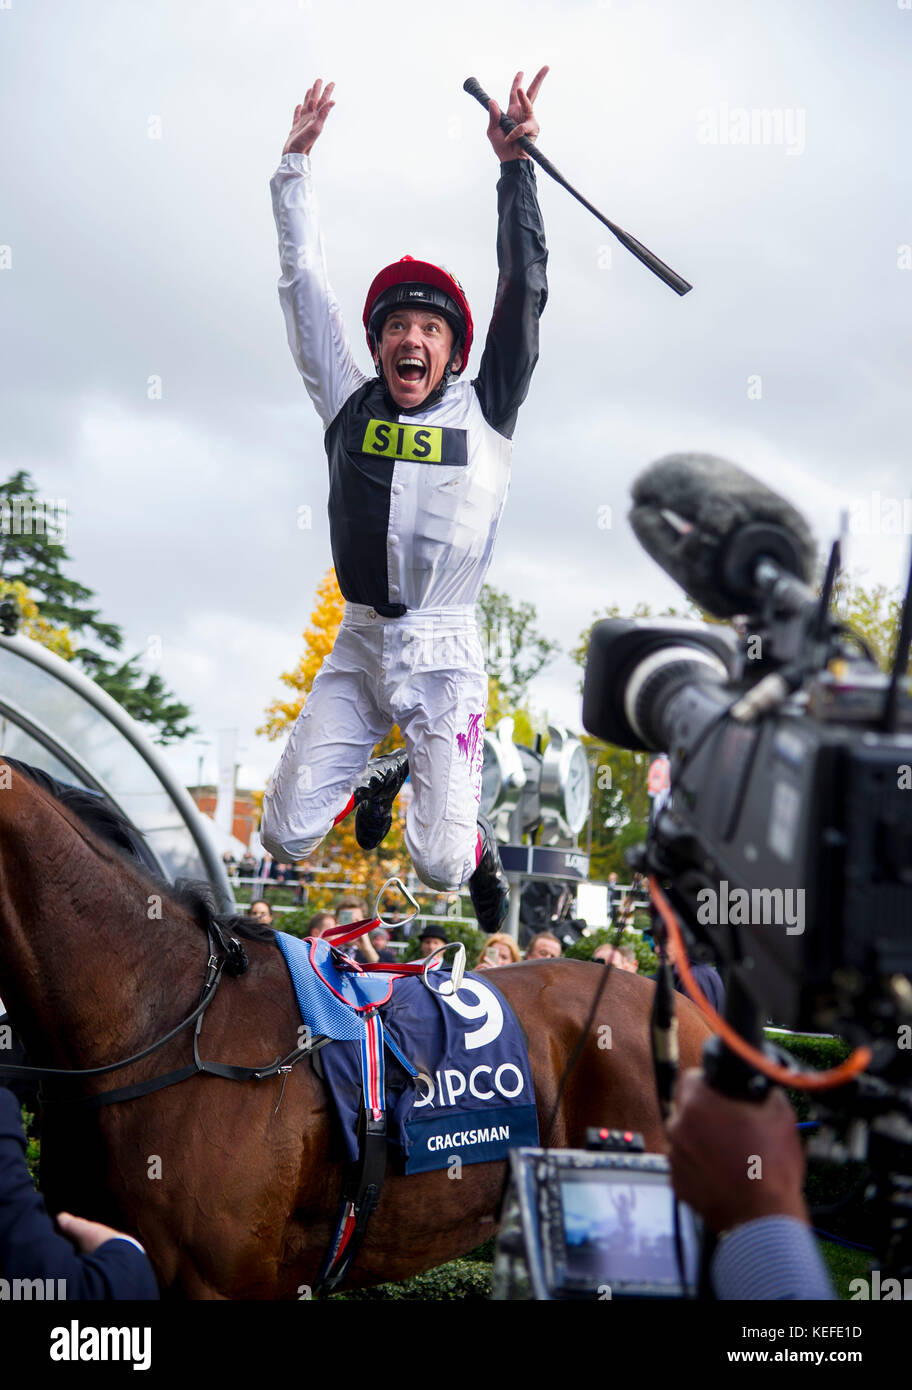 Ascot, UK. 21st Oct, 2017. Frankie Dettori flying dismount after winning the Champion Stakes on Cracksman at Ascot Races on Qipco Champions Day. Credit: John Beasley/Alamy Live News Stock Photo